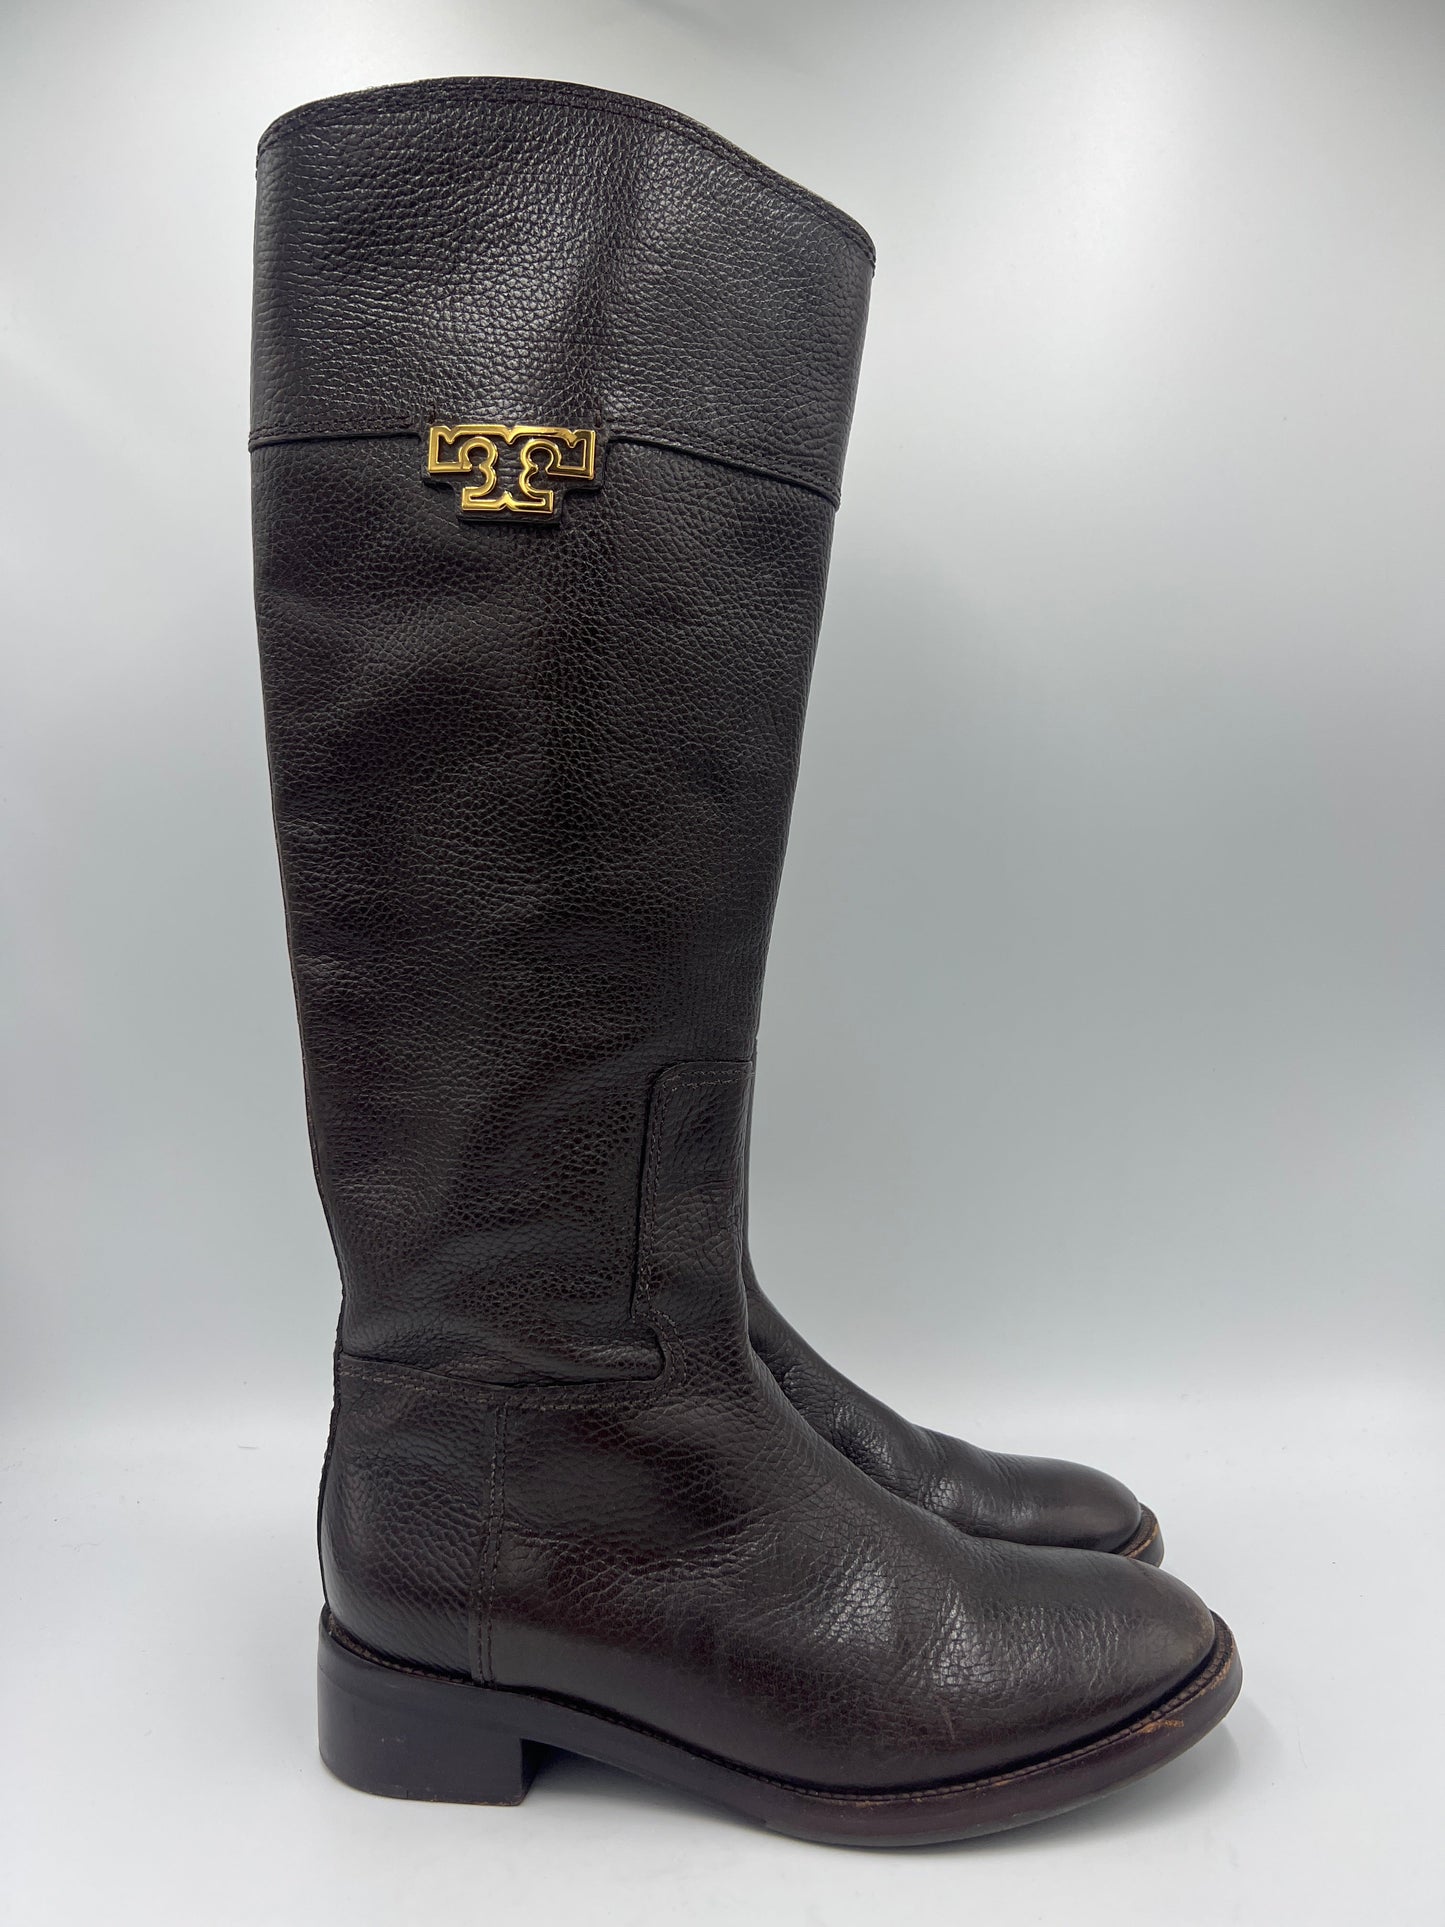 Boots Designer By Tory Burch  Size: 7